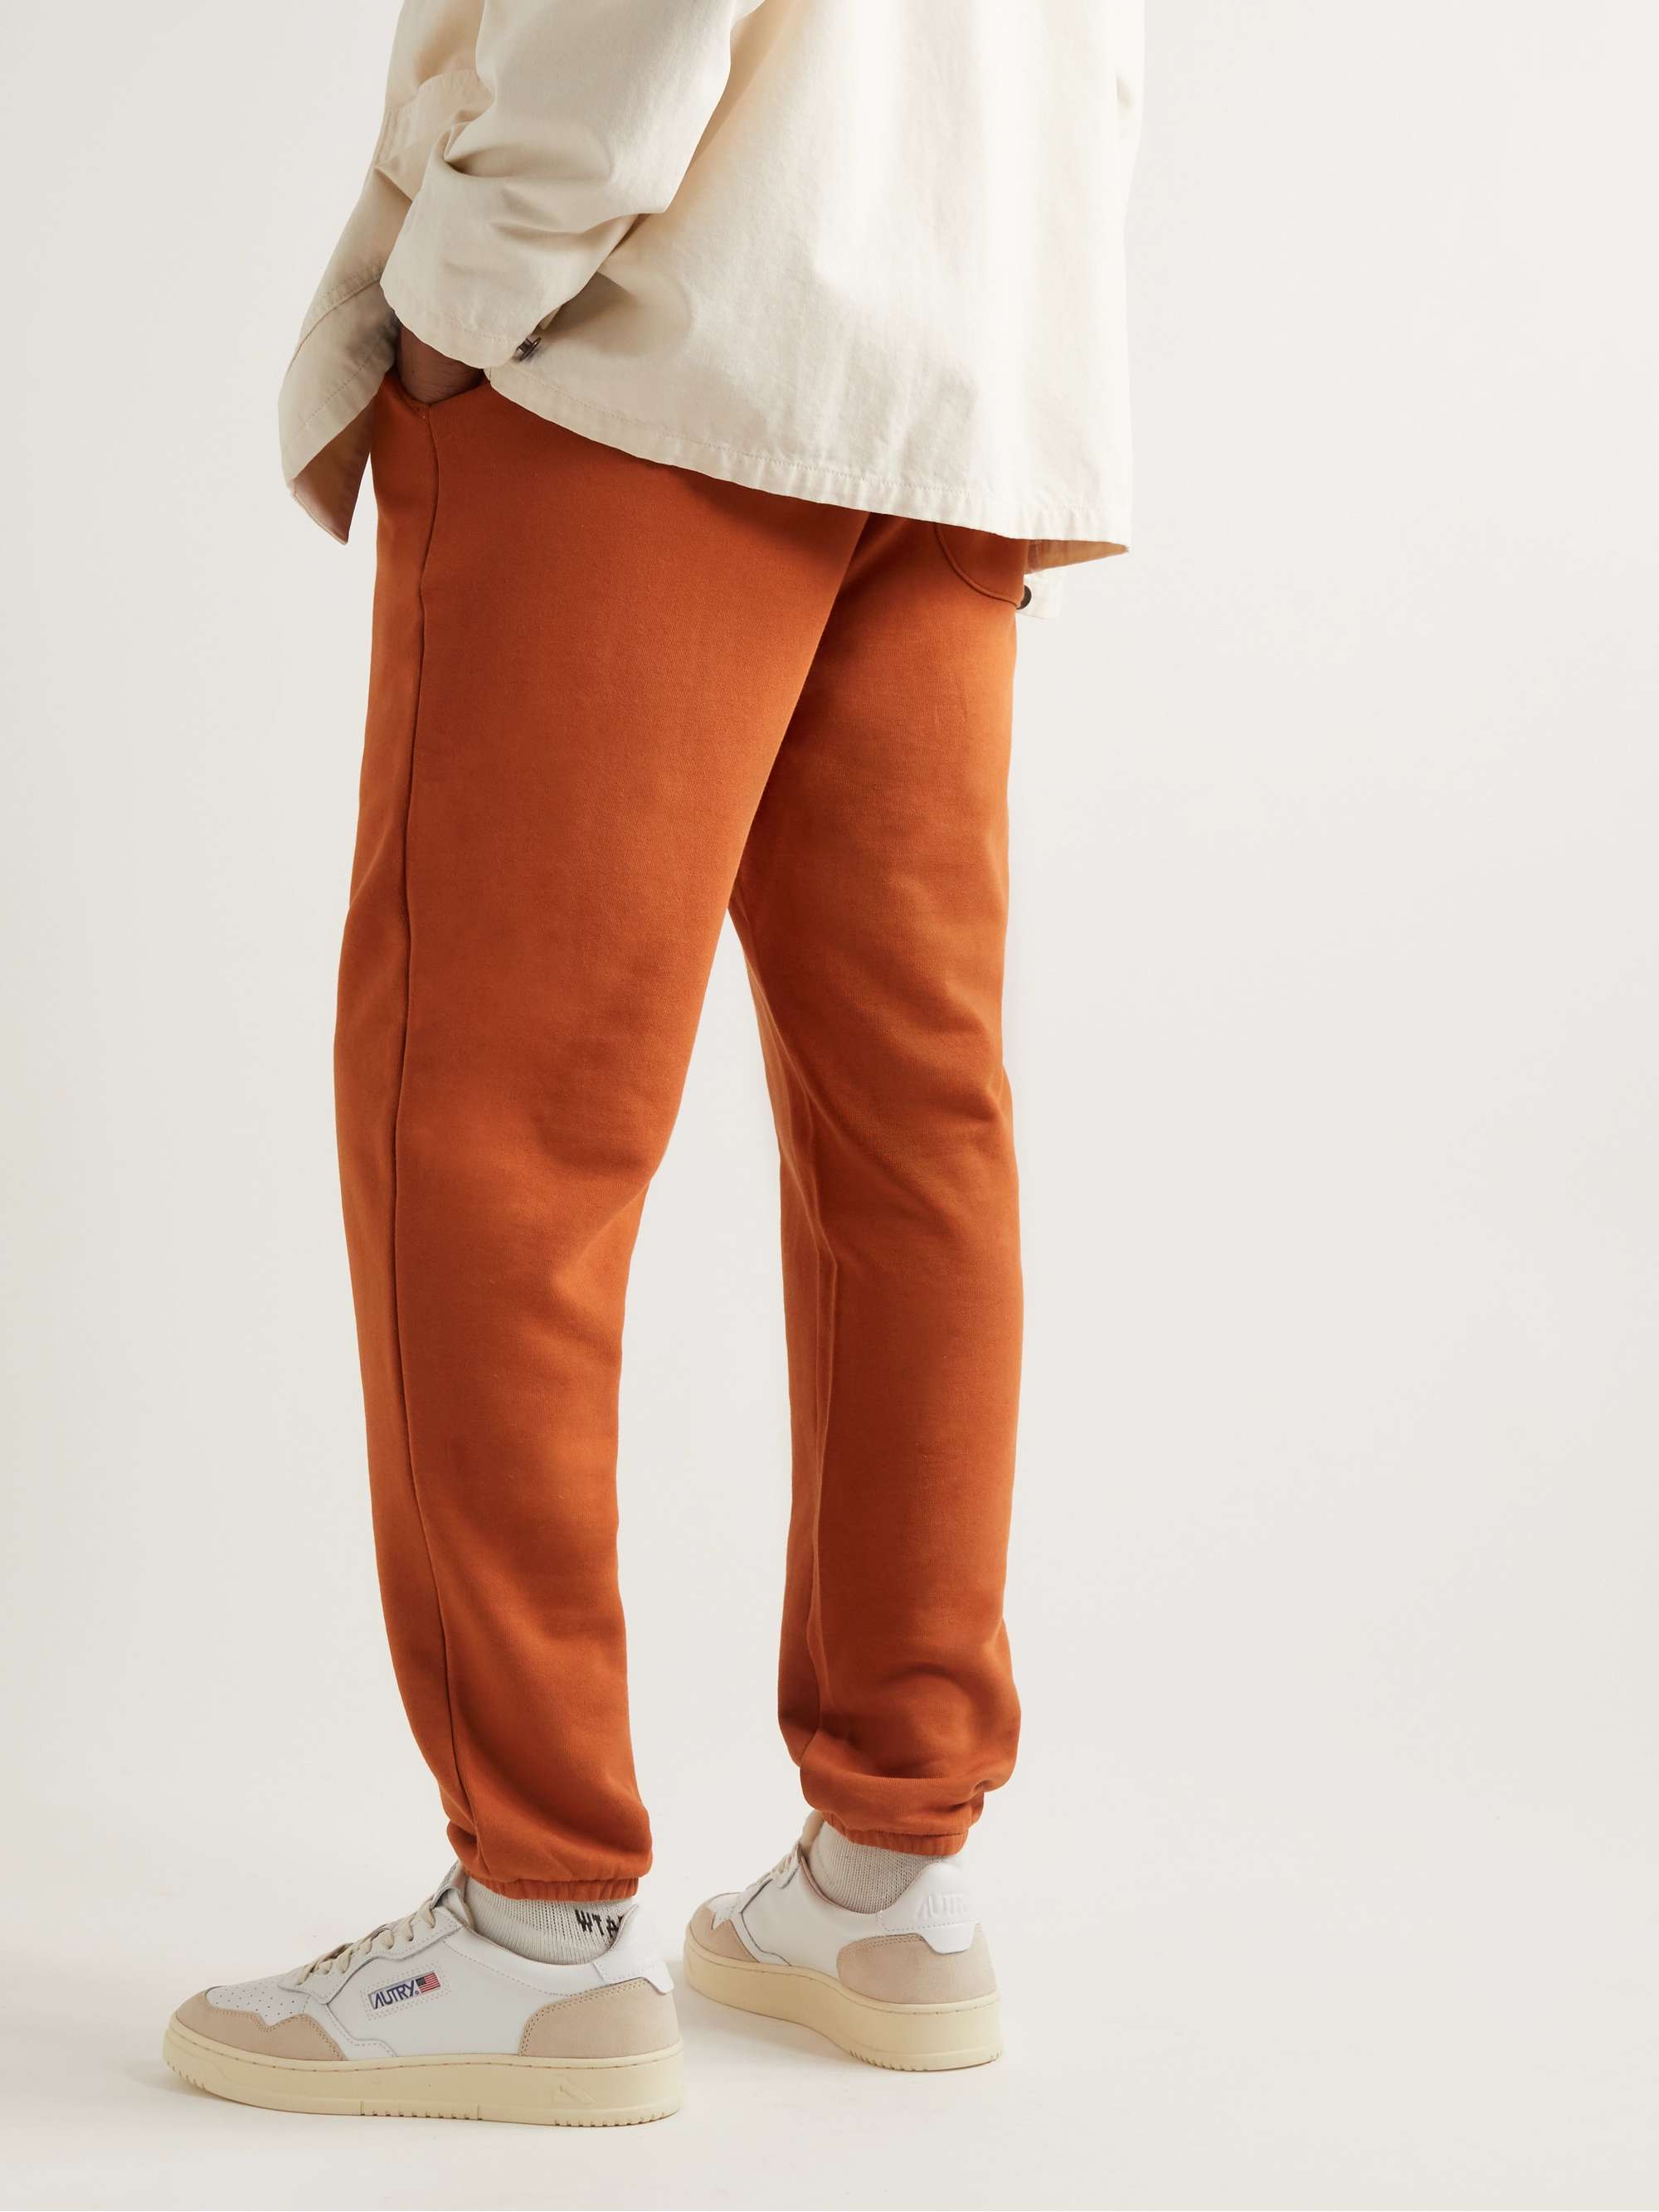 OUTERKNOWN All-Day Tapered Organic Cotton-Blend Jersey Sweatpants